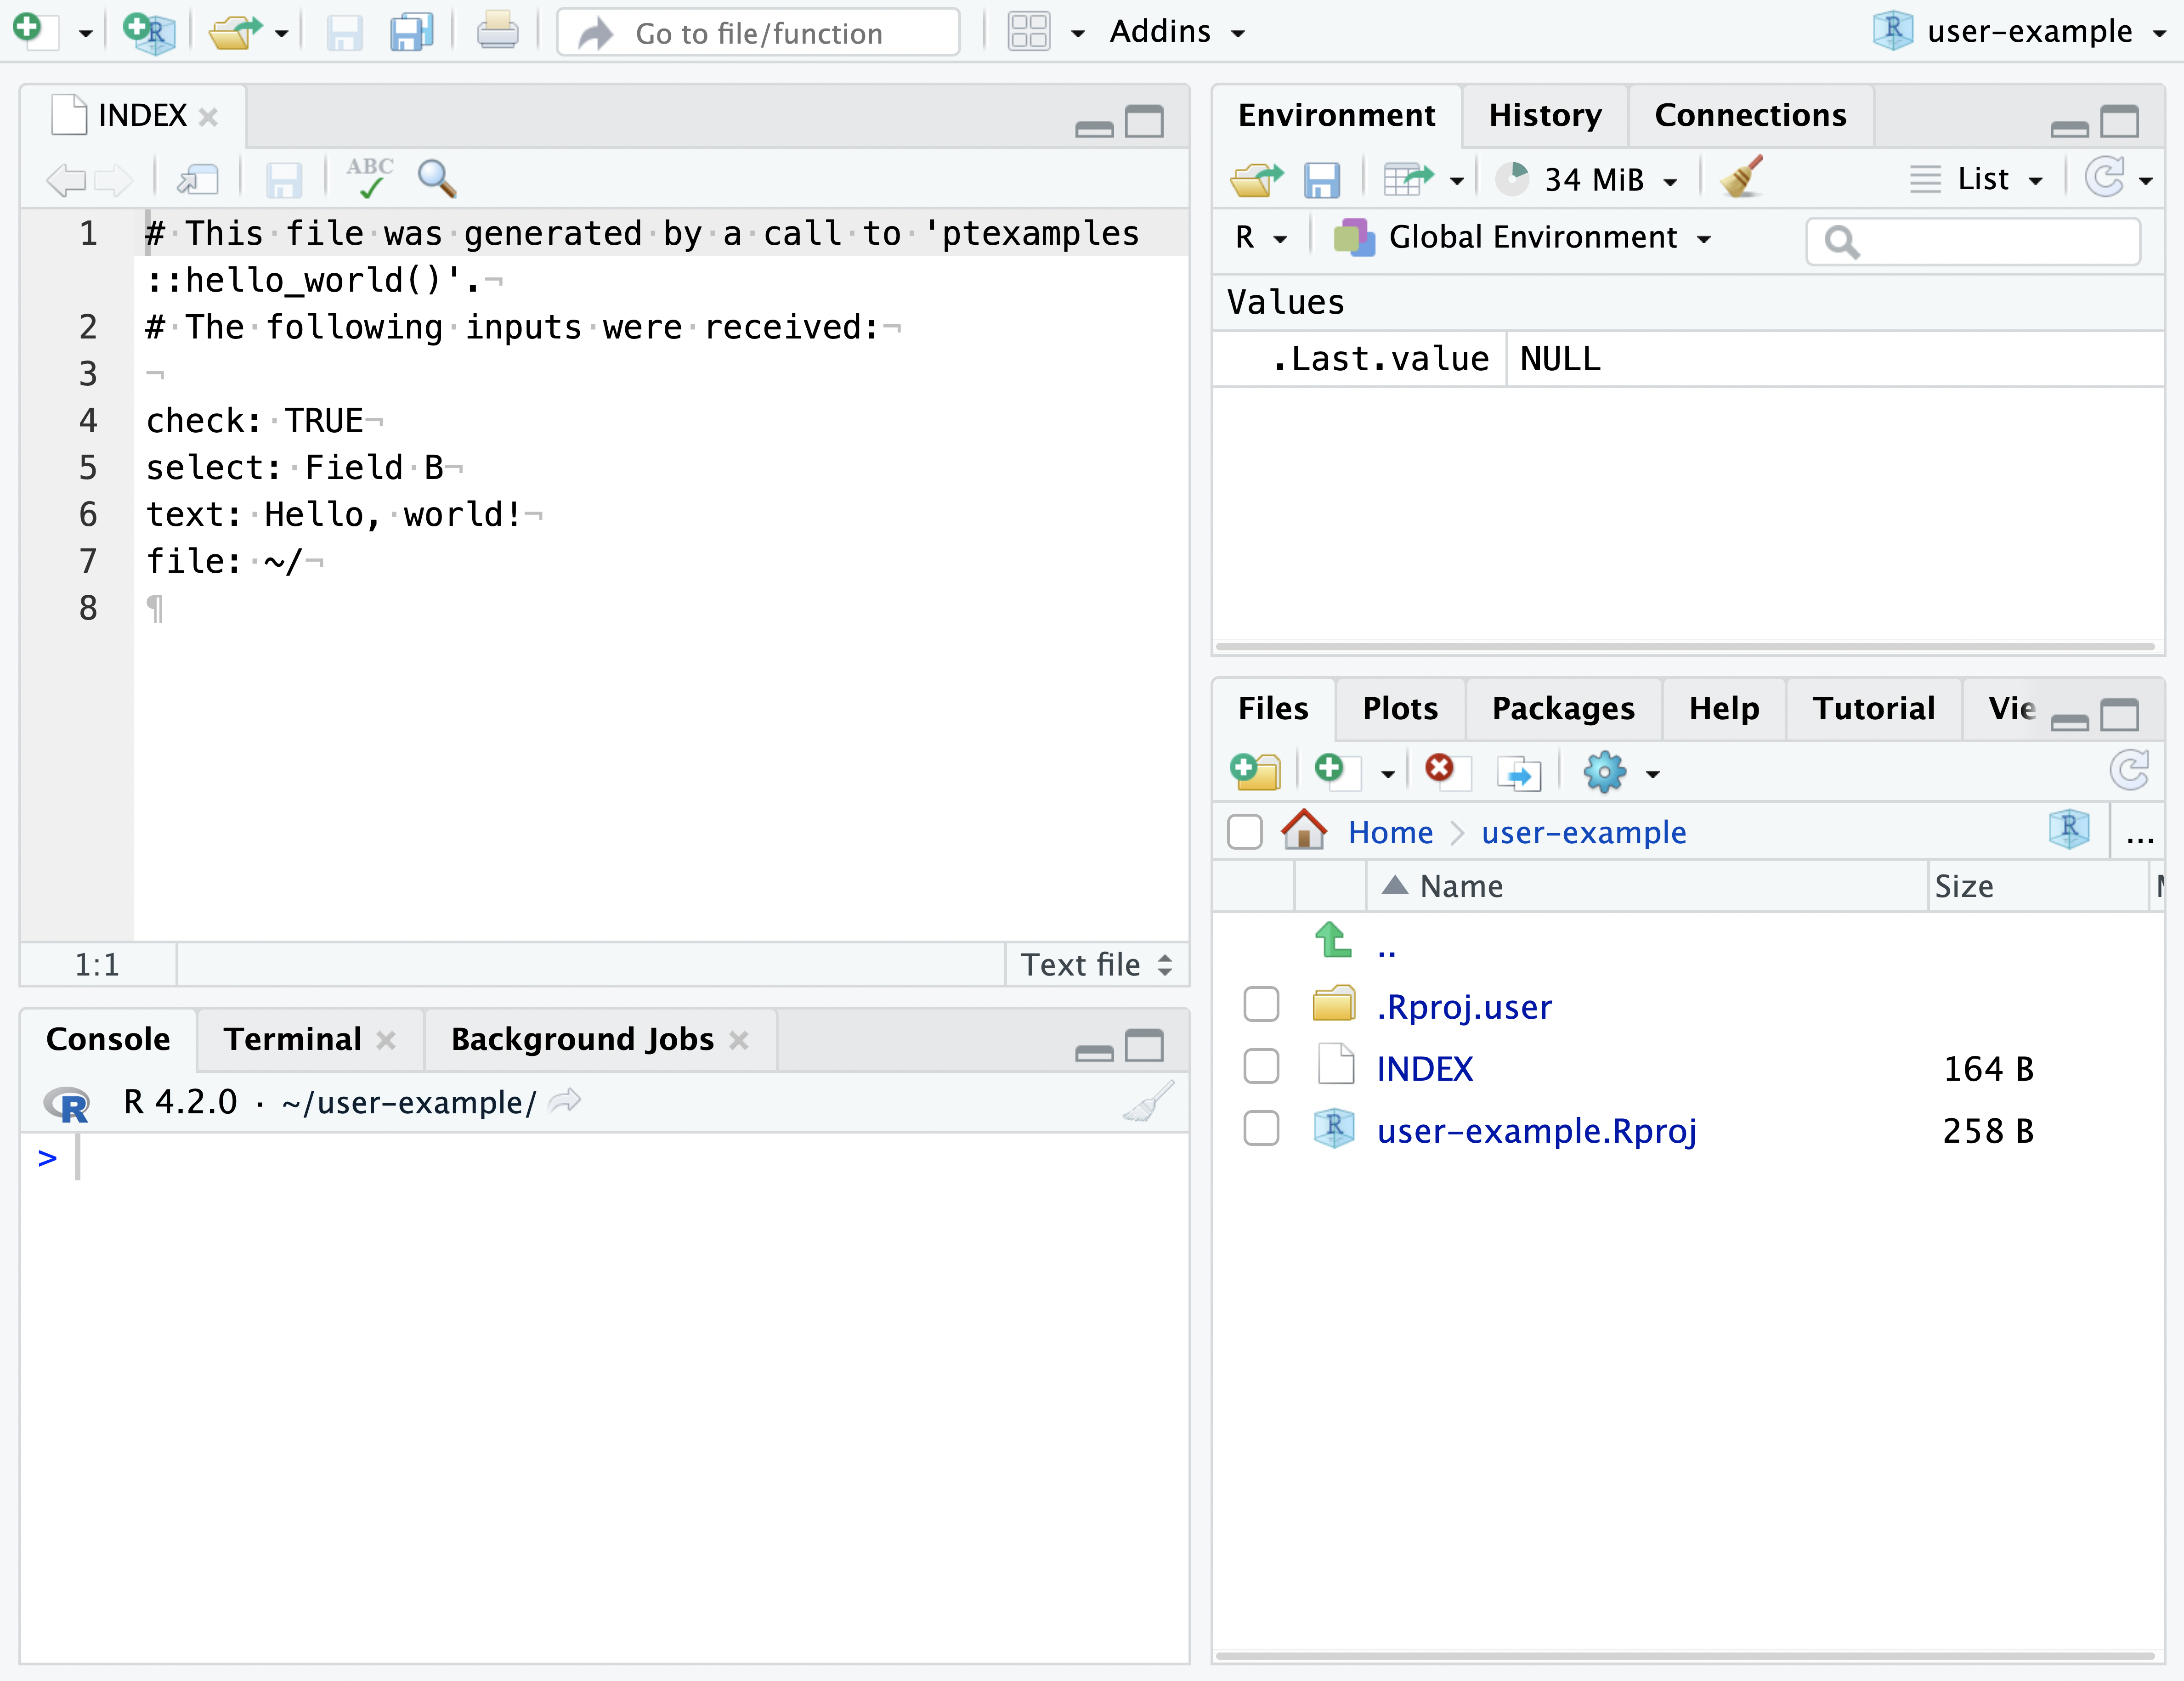 A screenshot of the newly created ptexamples RStudio project displaying the index with the user inputs.